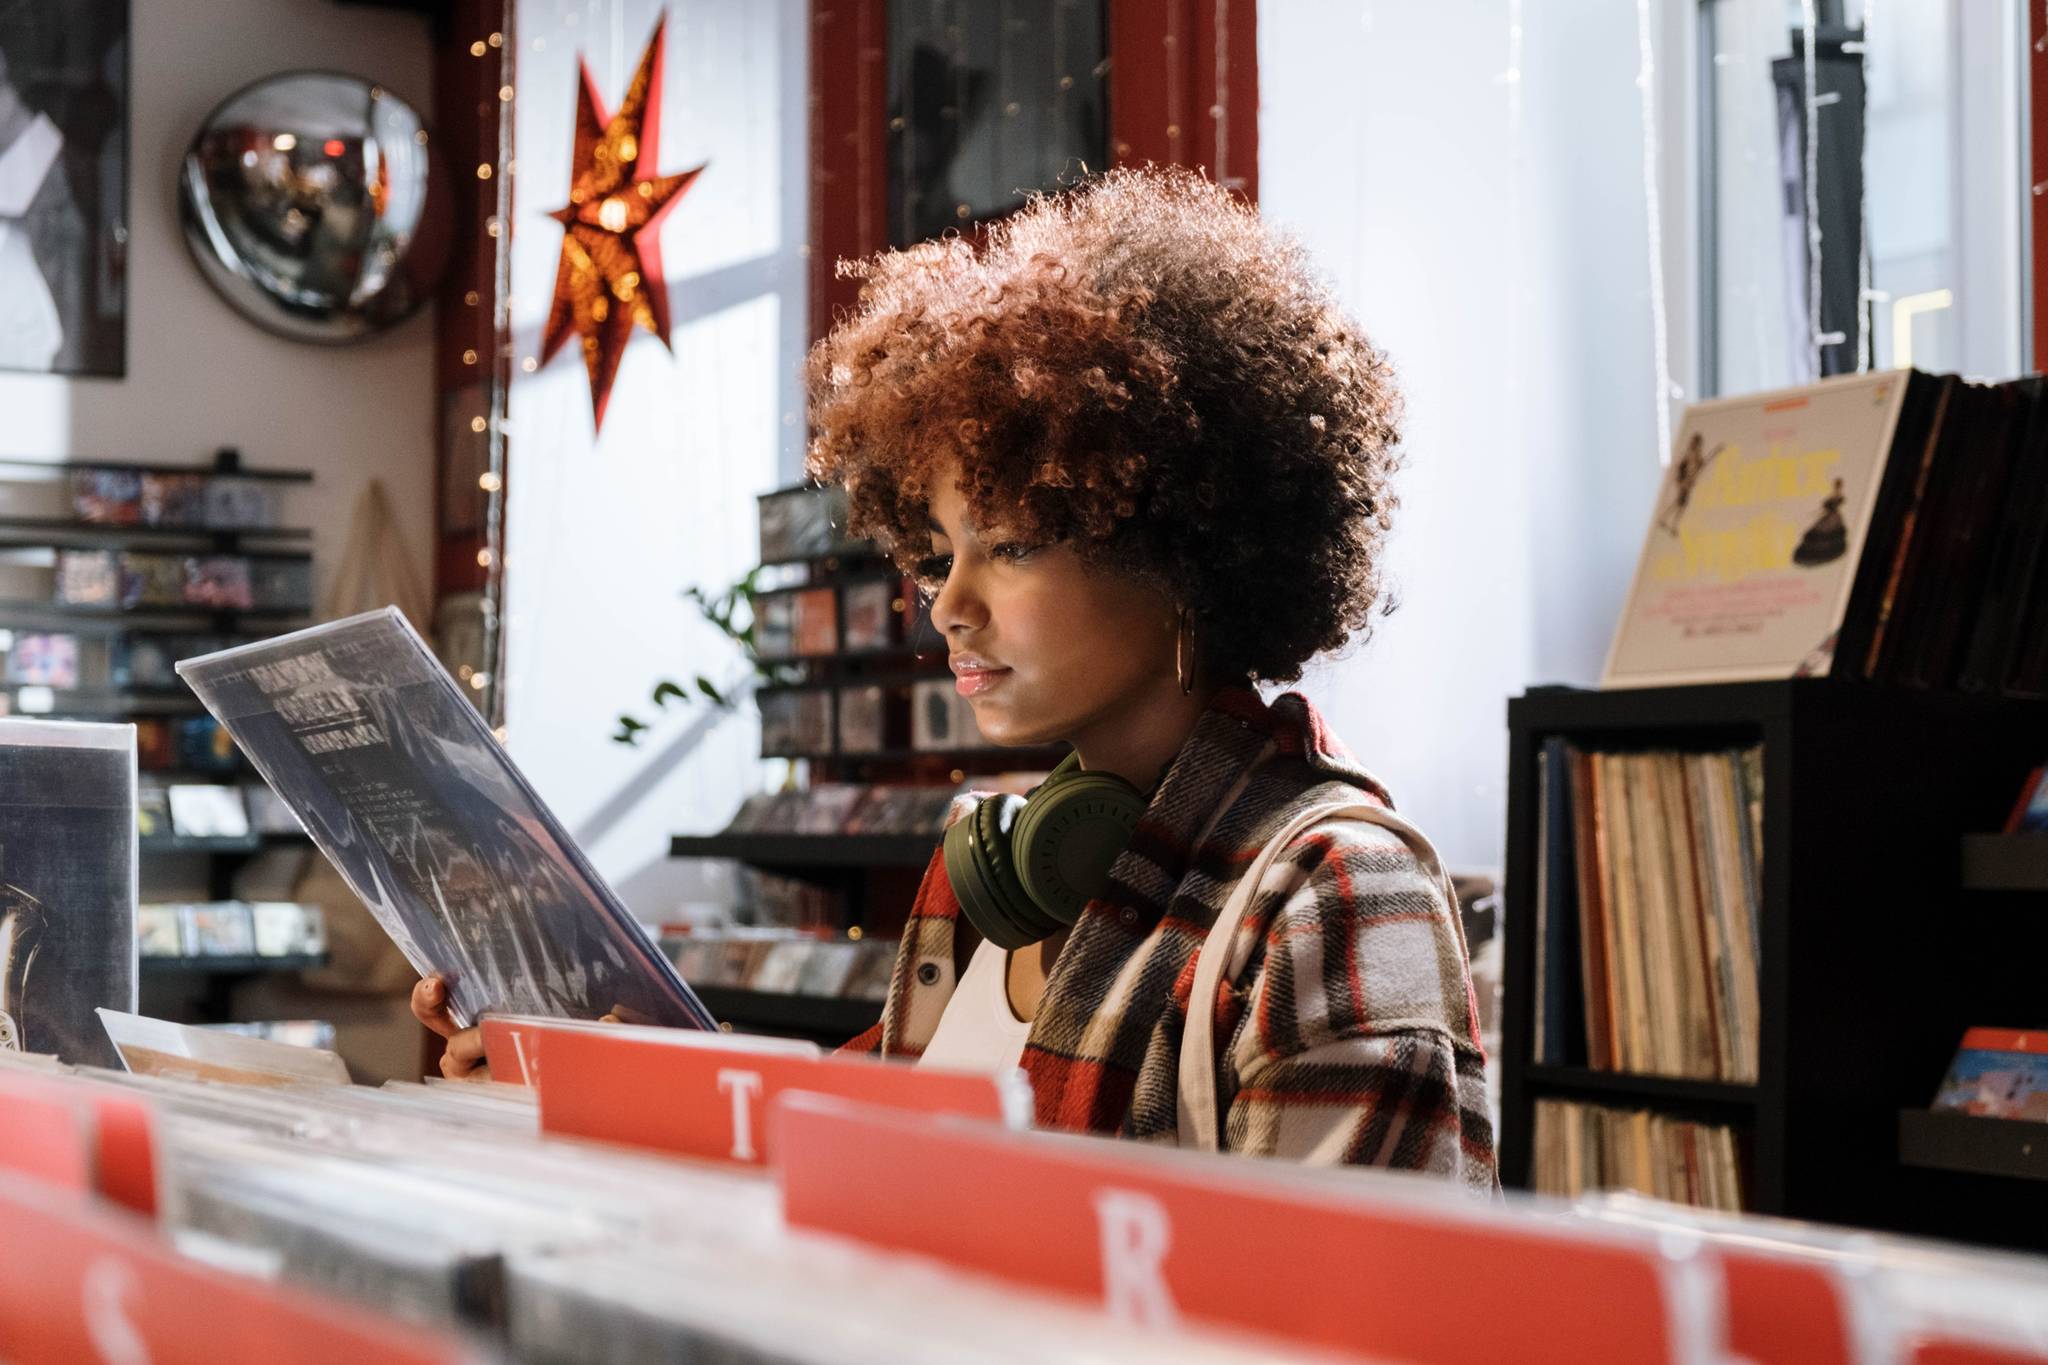 What’s driving the vinyl revival?